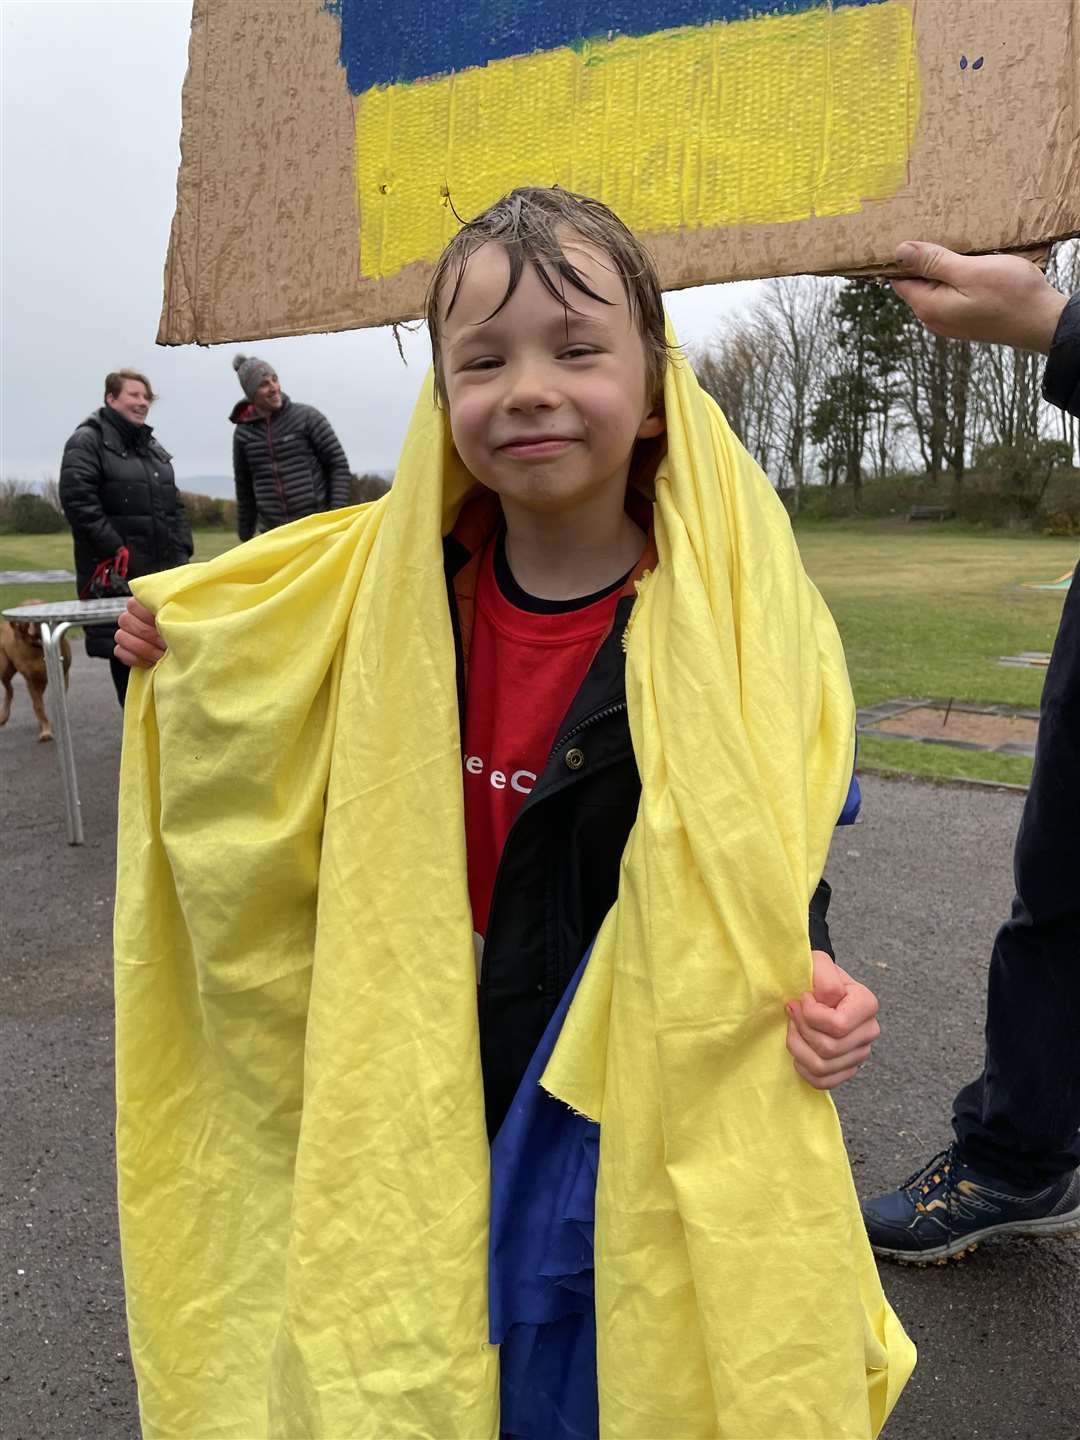 Magnus henderson with a Ukrainian flag during his walk.